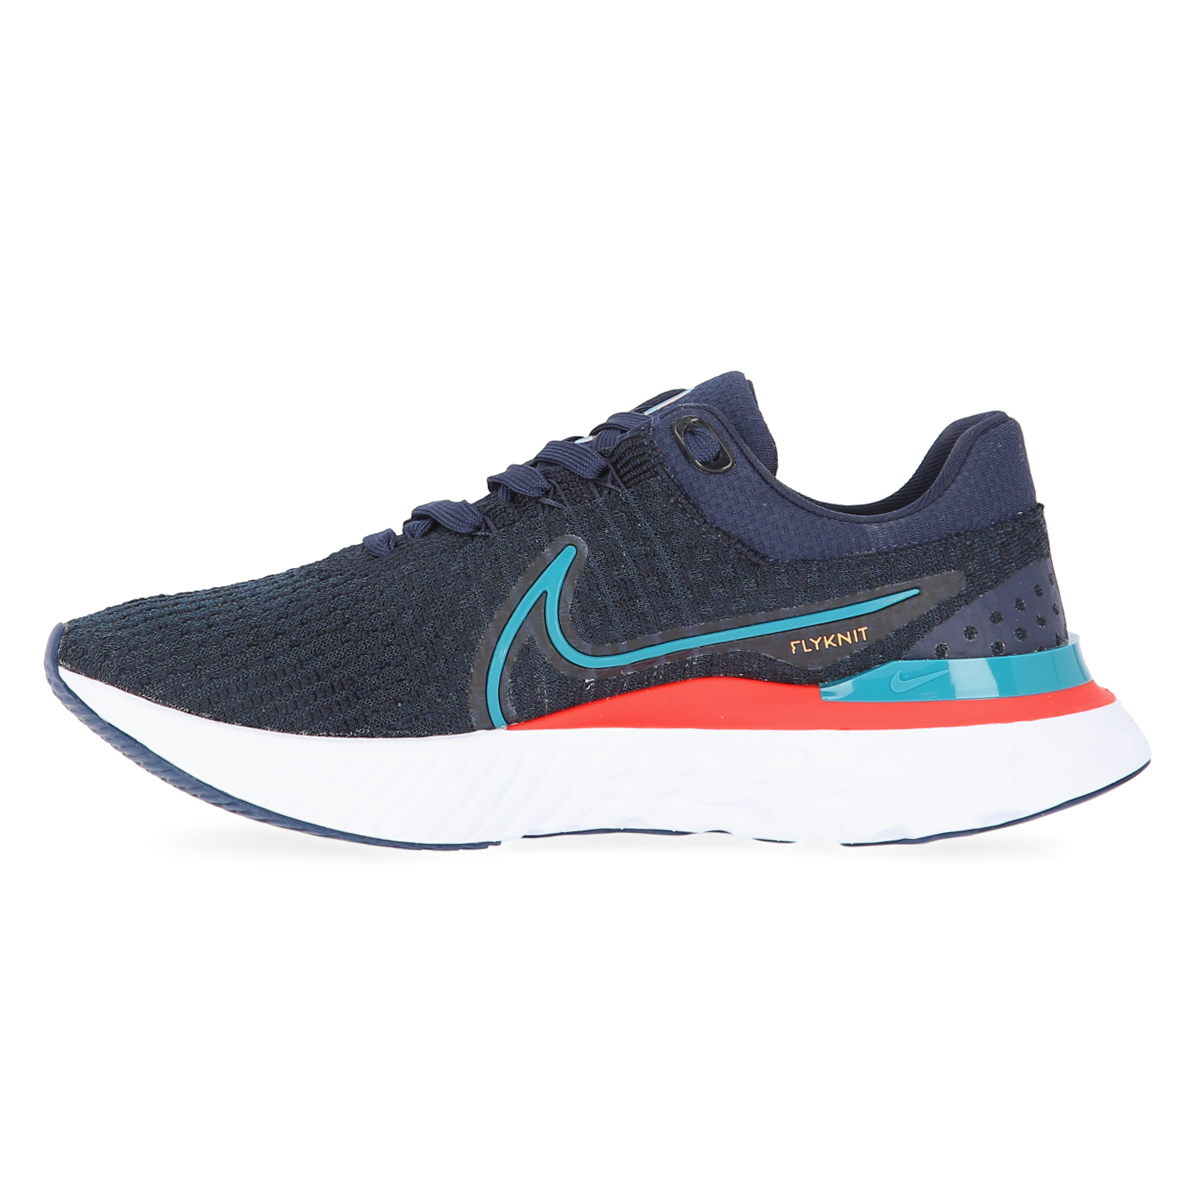 Zapatillas Nike React Infinity Run Fk 3 Hombre,  image number null